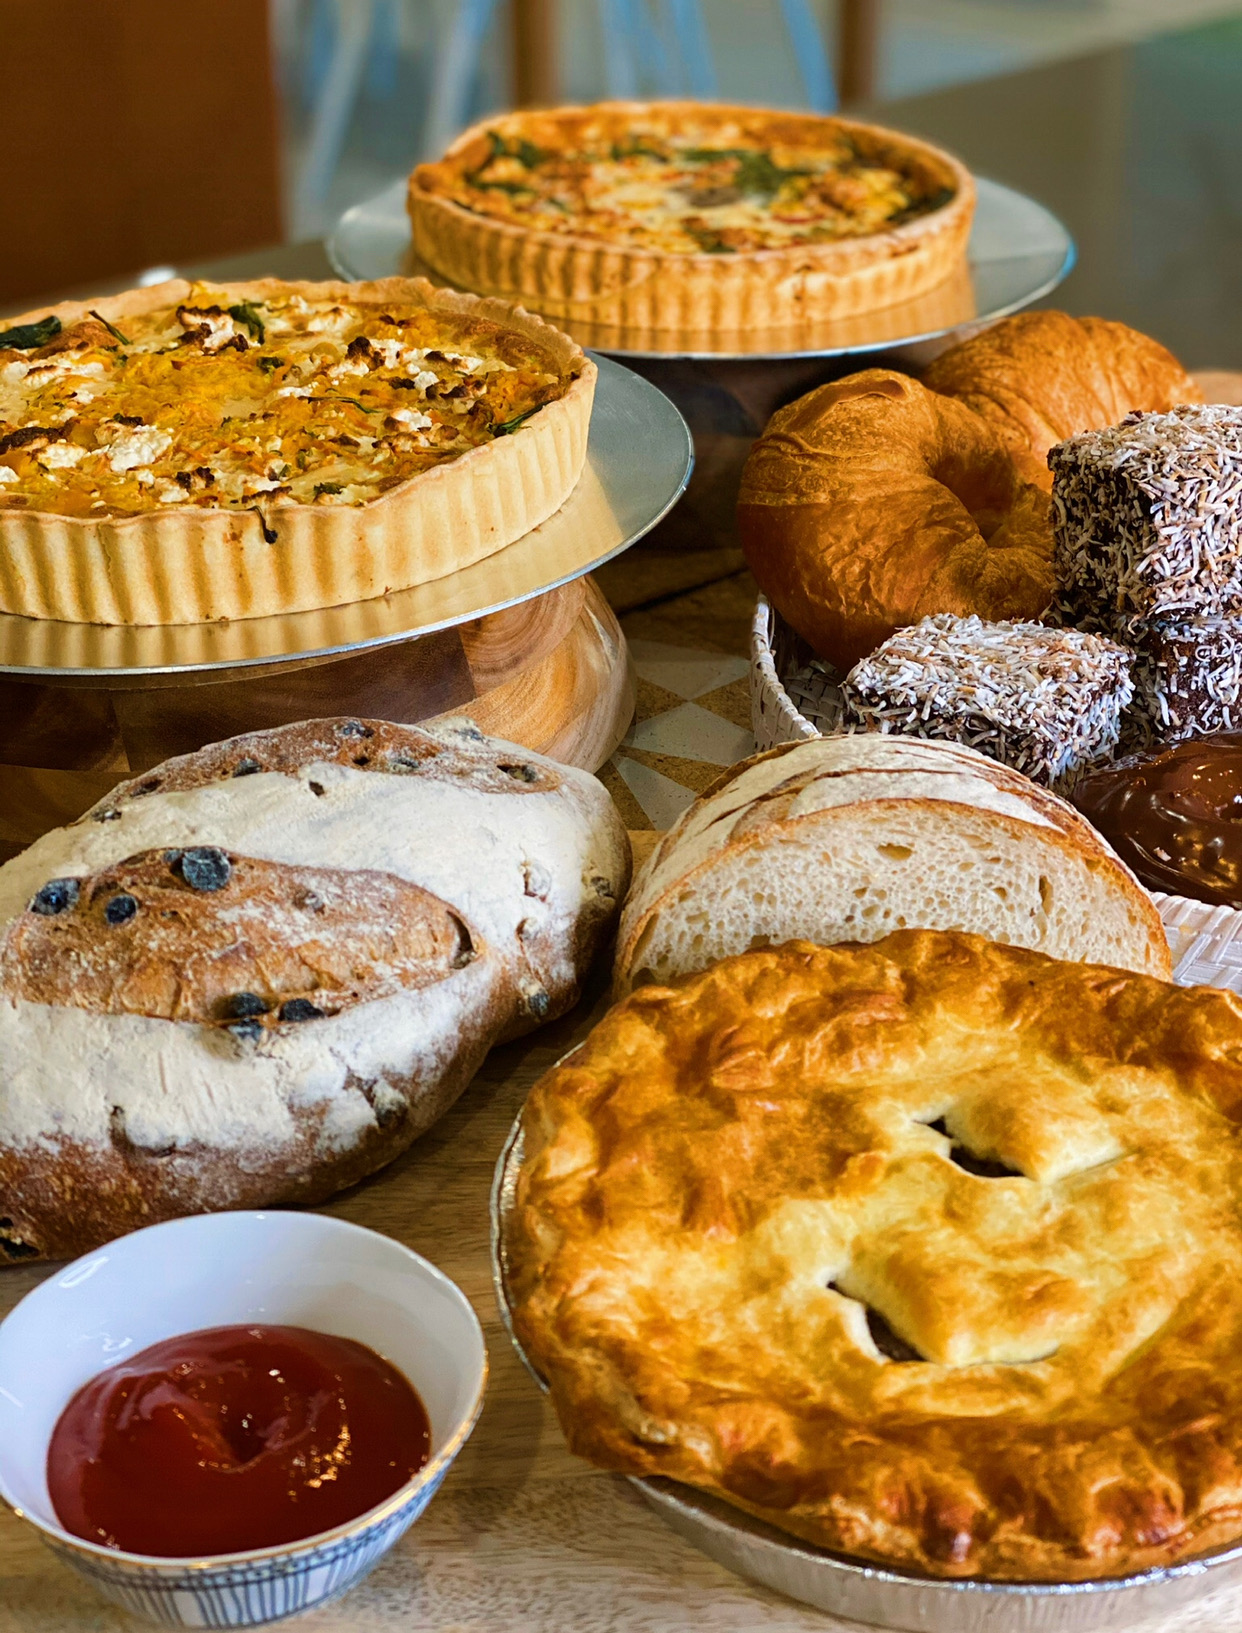 WIN two beautiful hampers of delicious Skala Bakery products